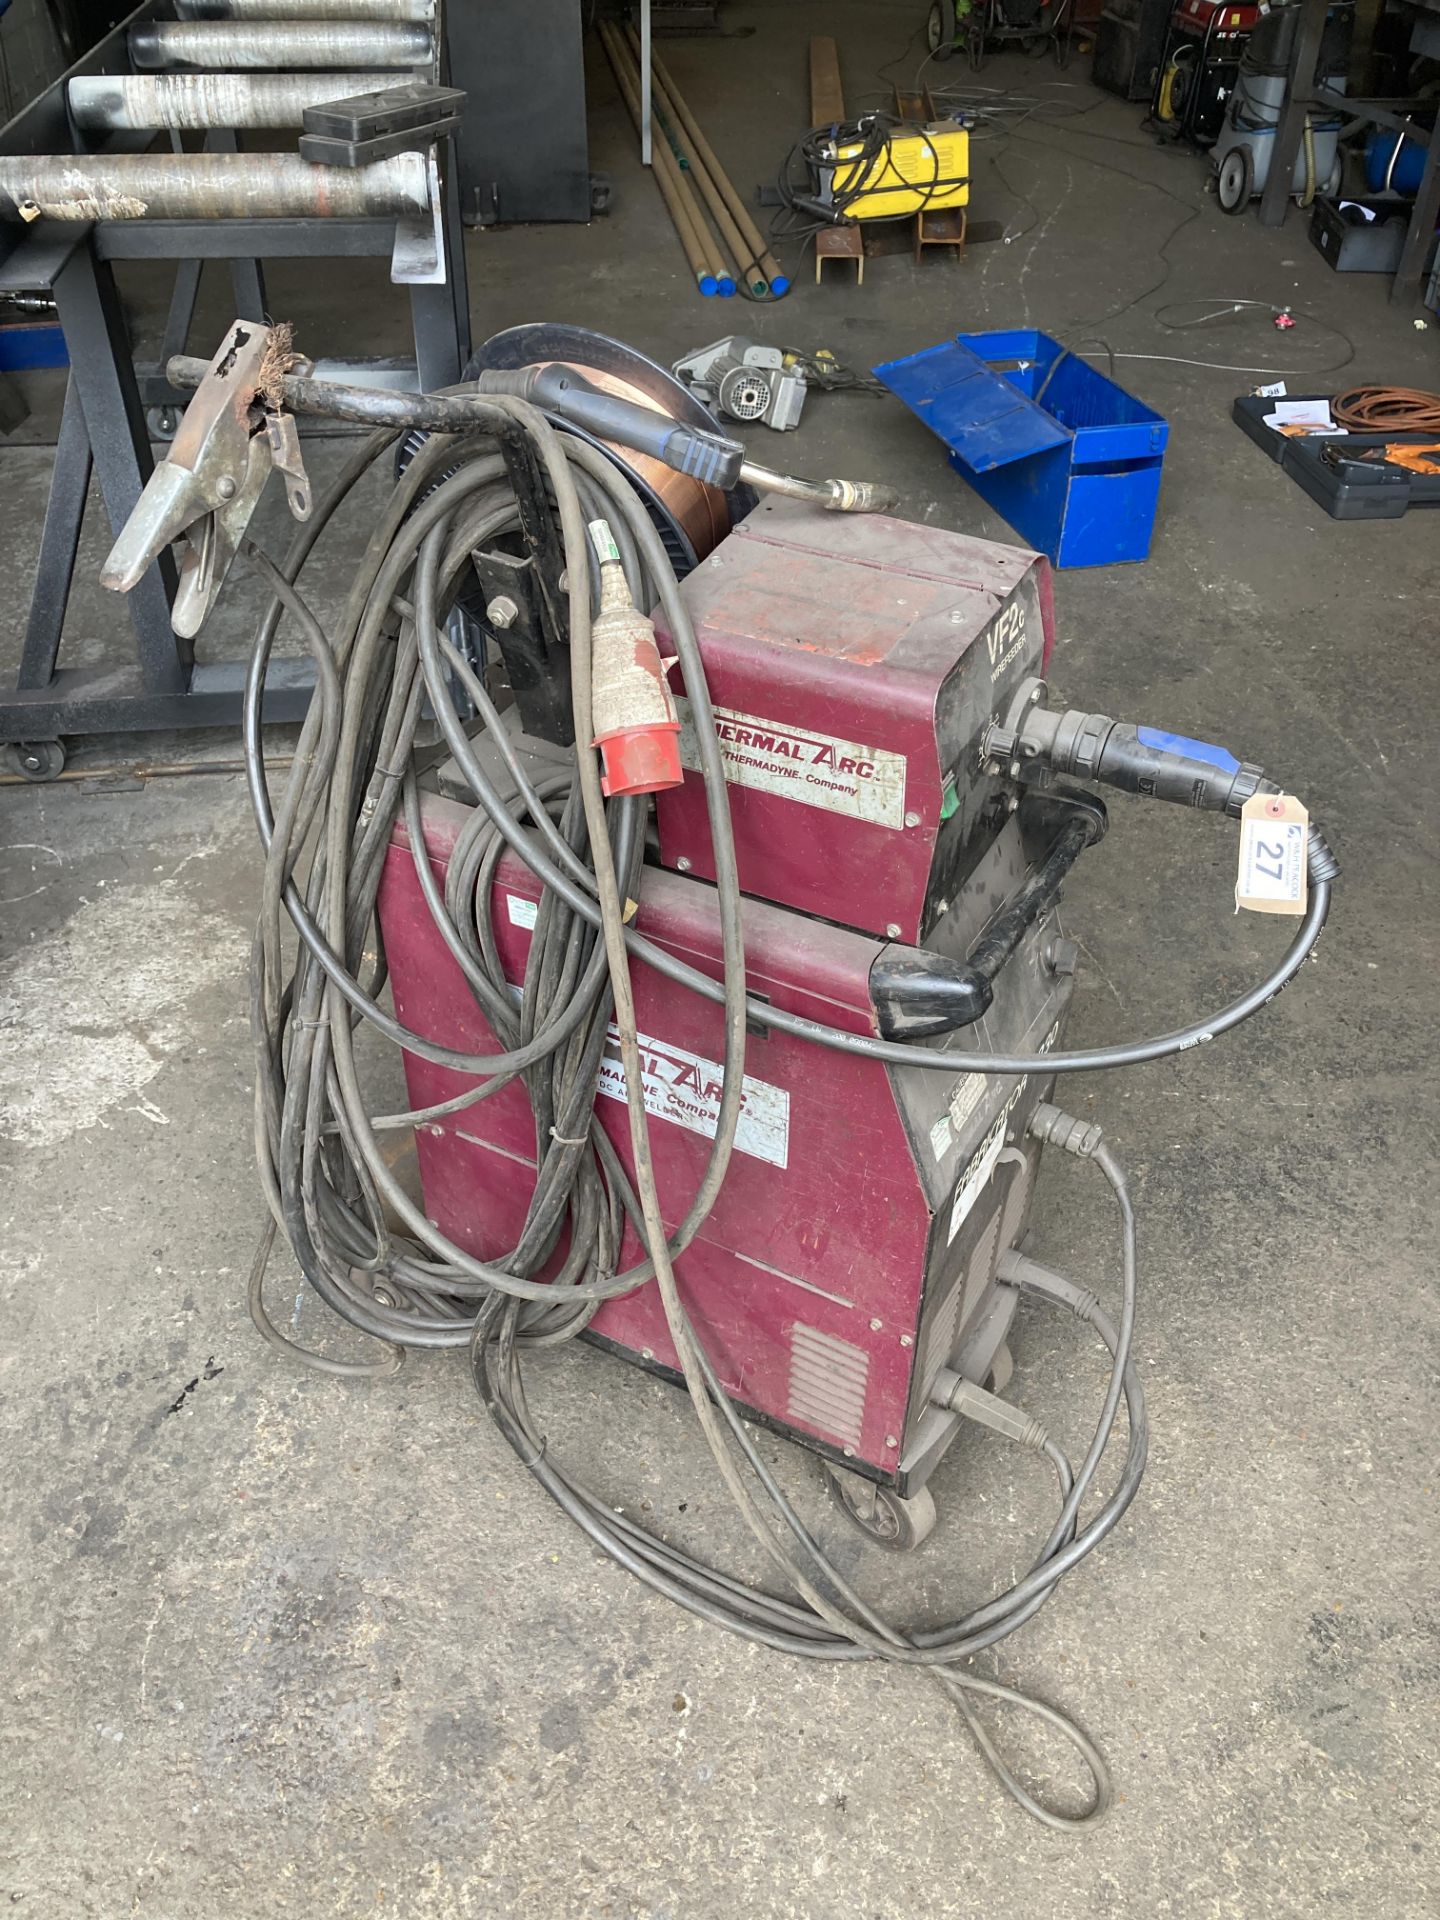 Thermal Arc Fabricator 330 mig welding set with VF2C wire feed - Image 4 of 4